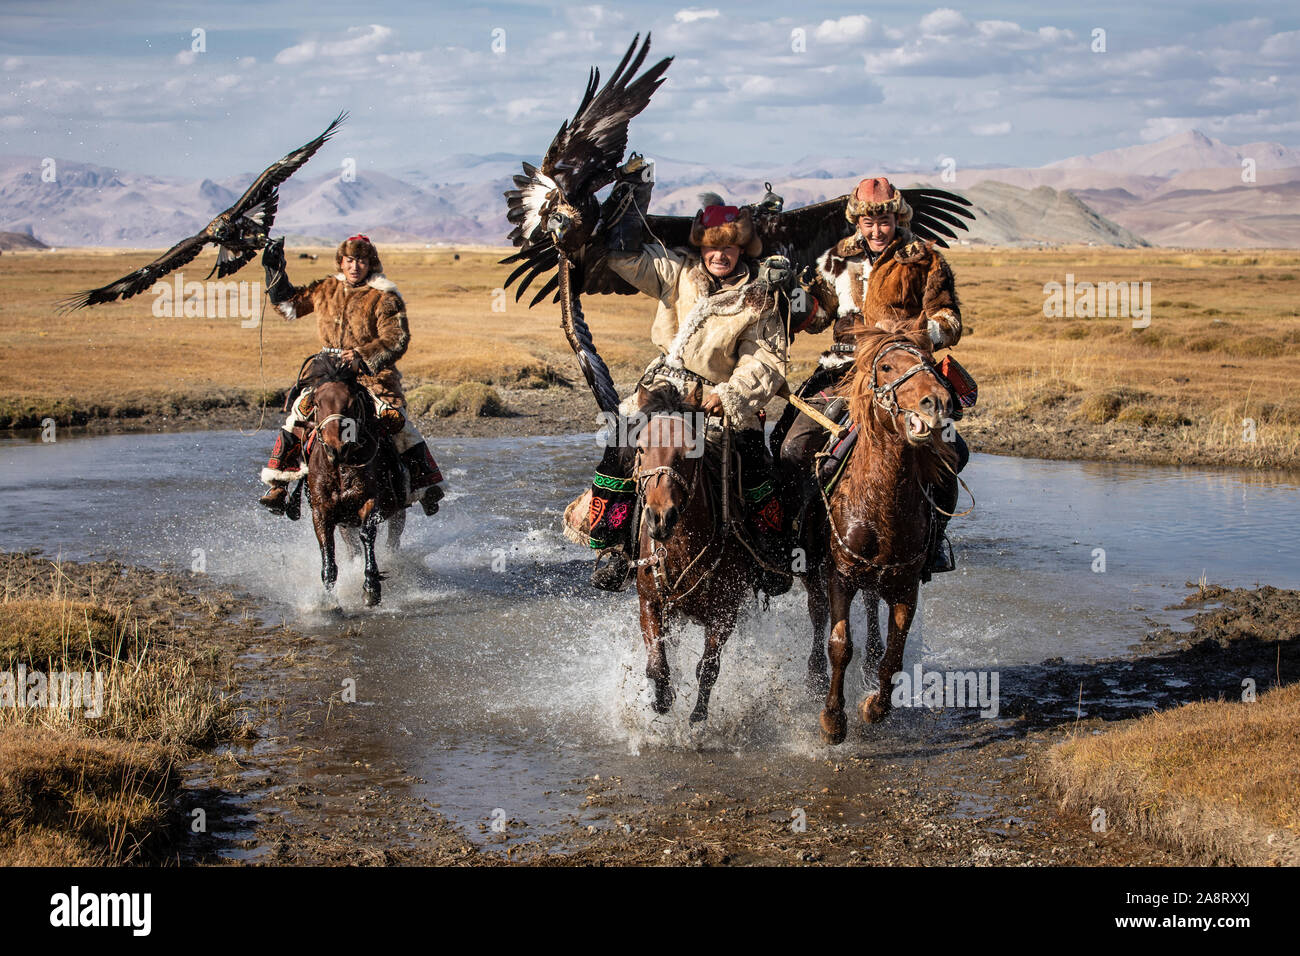 A group of traditional kazakh eagle hunters holding their golden eagles on horseback while galloping througha river. Ulgii, Mongolia. Stock Photo